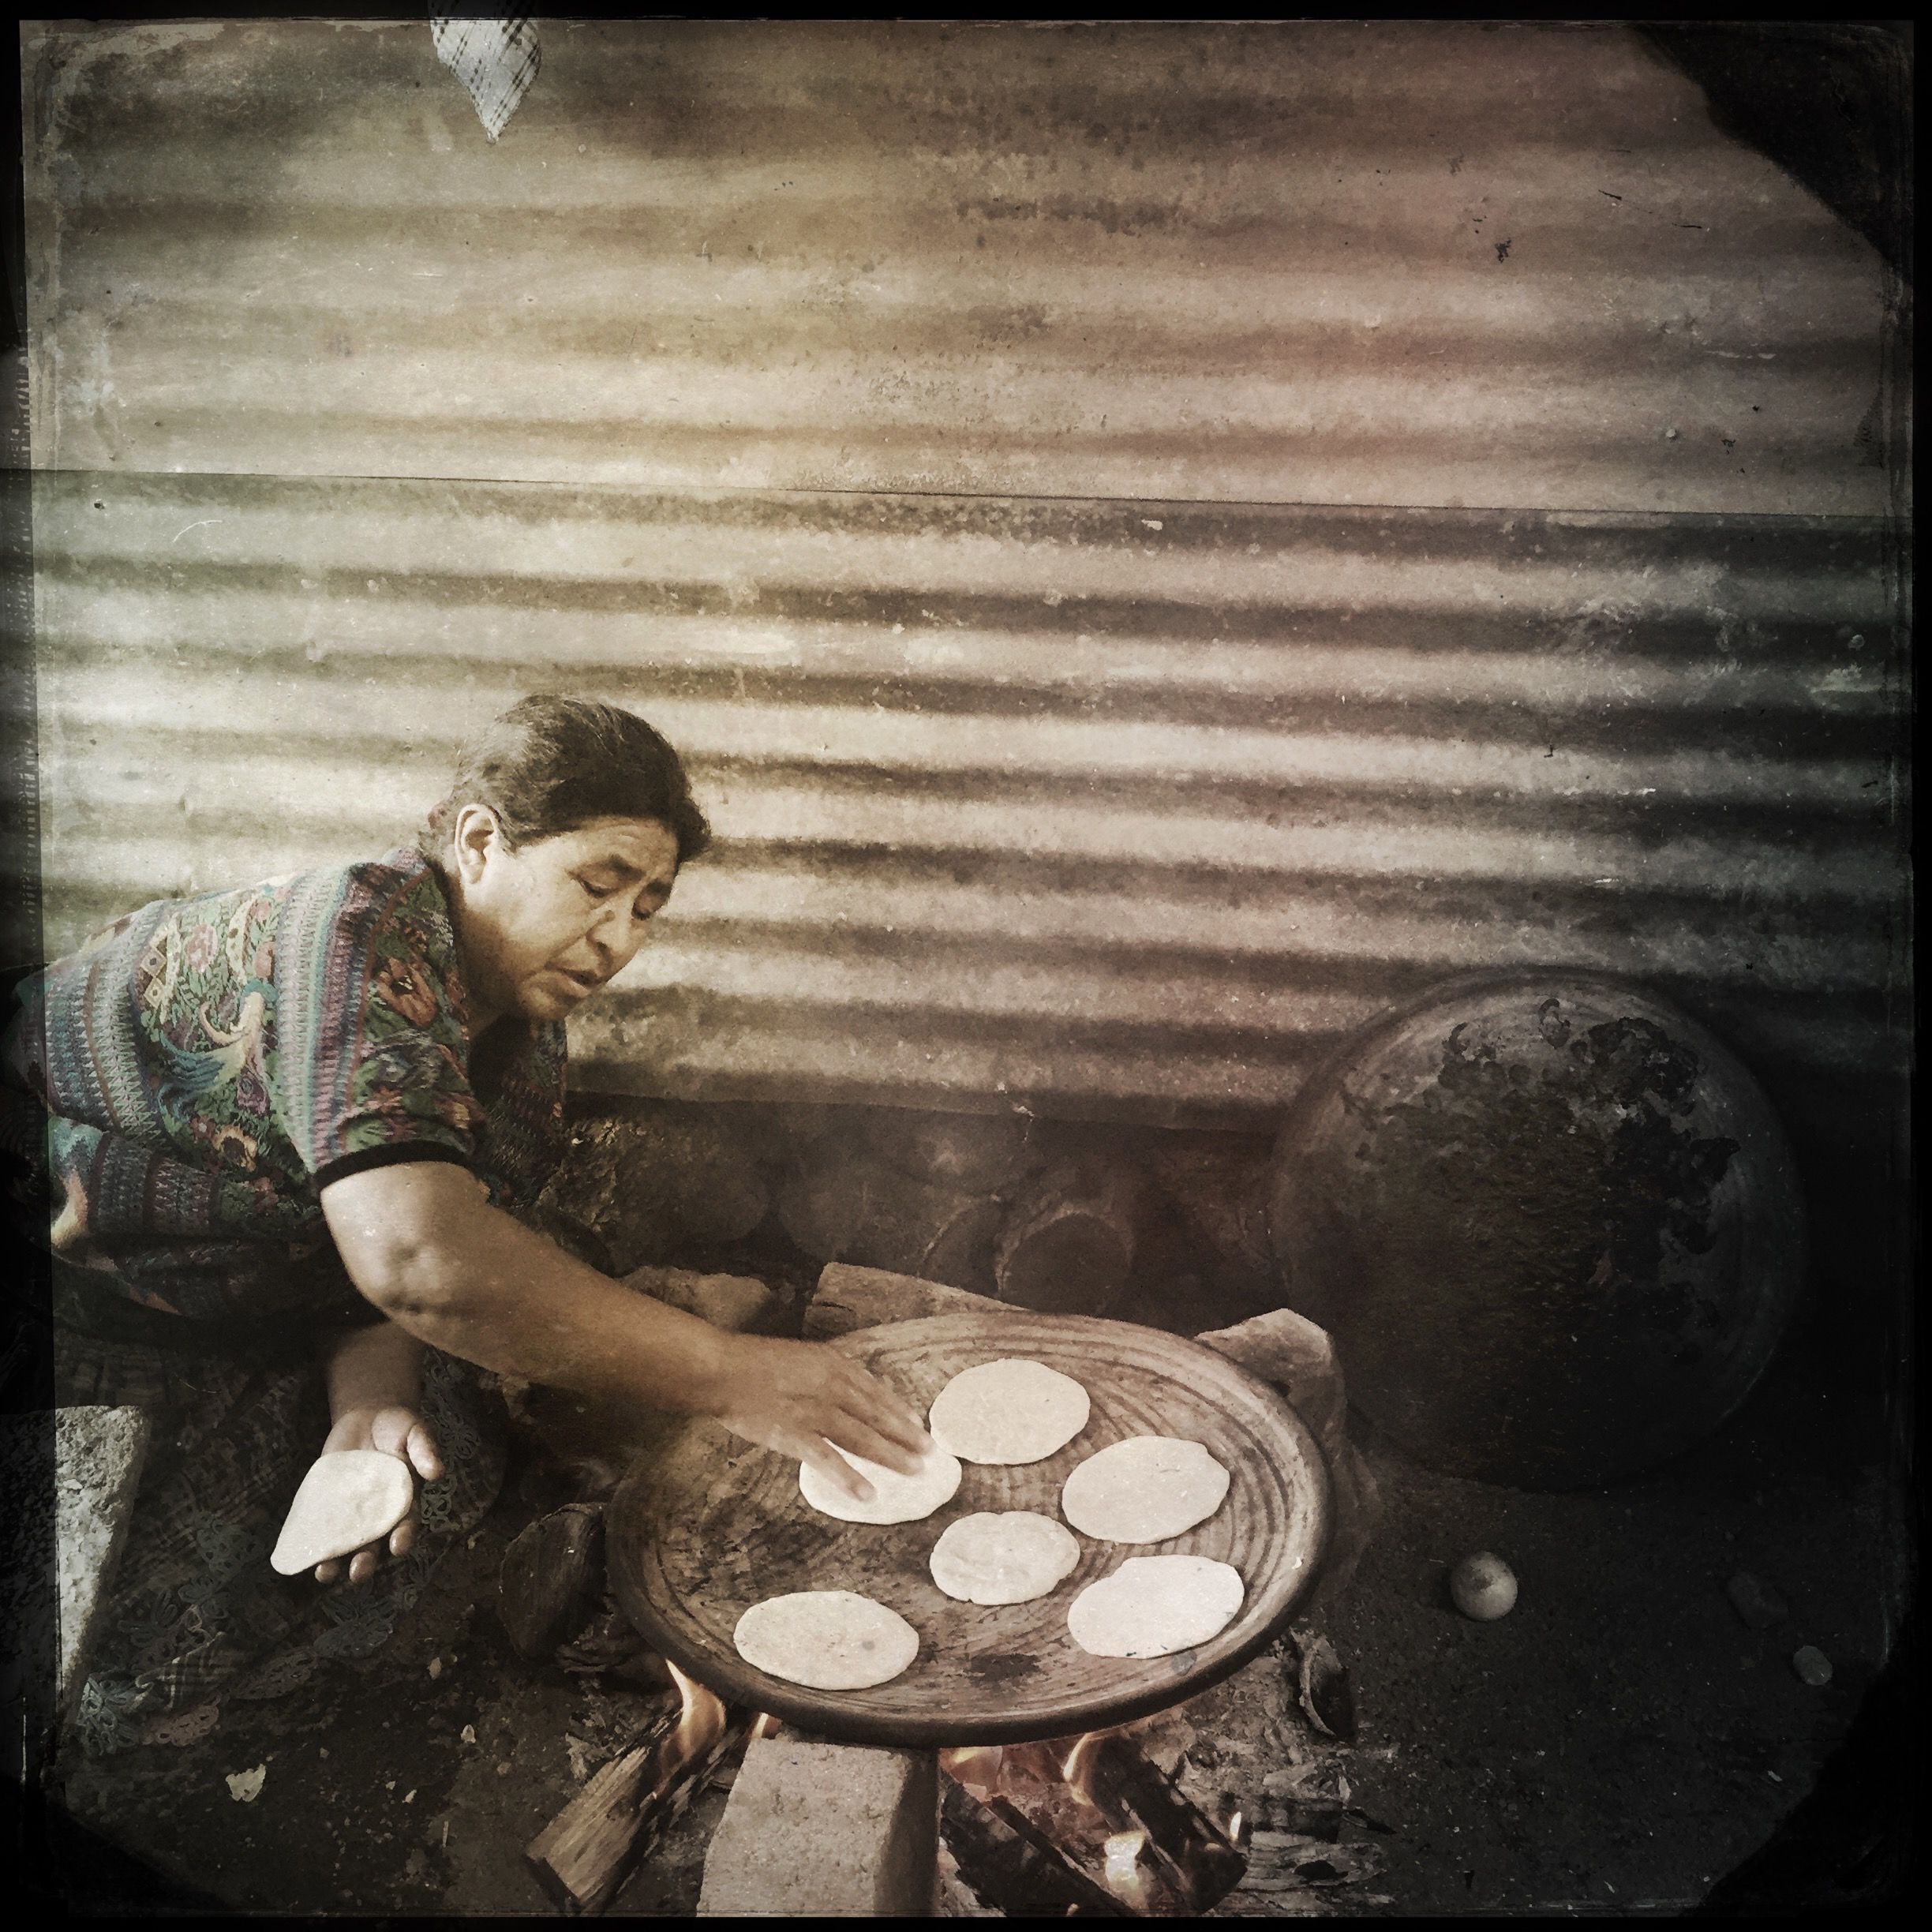 Maria de Jesus Lopez Pérez, 62, spends some three hours a day on her knees over an open fire, making tortillas for her extended family in San Antonio Aguas Calientes, Guatemala. Photo by Lynn Johnson. Guatemala, 2017.